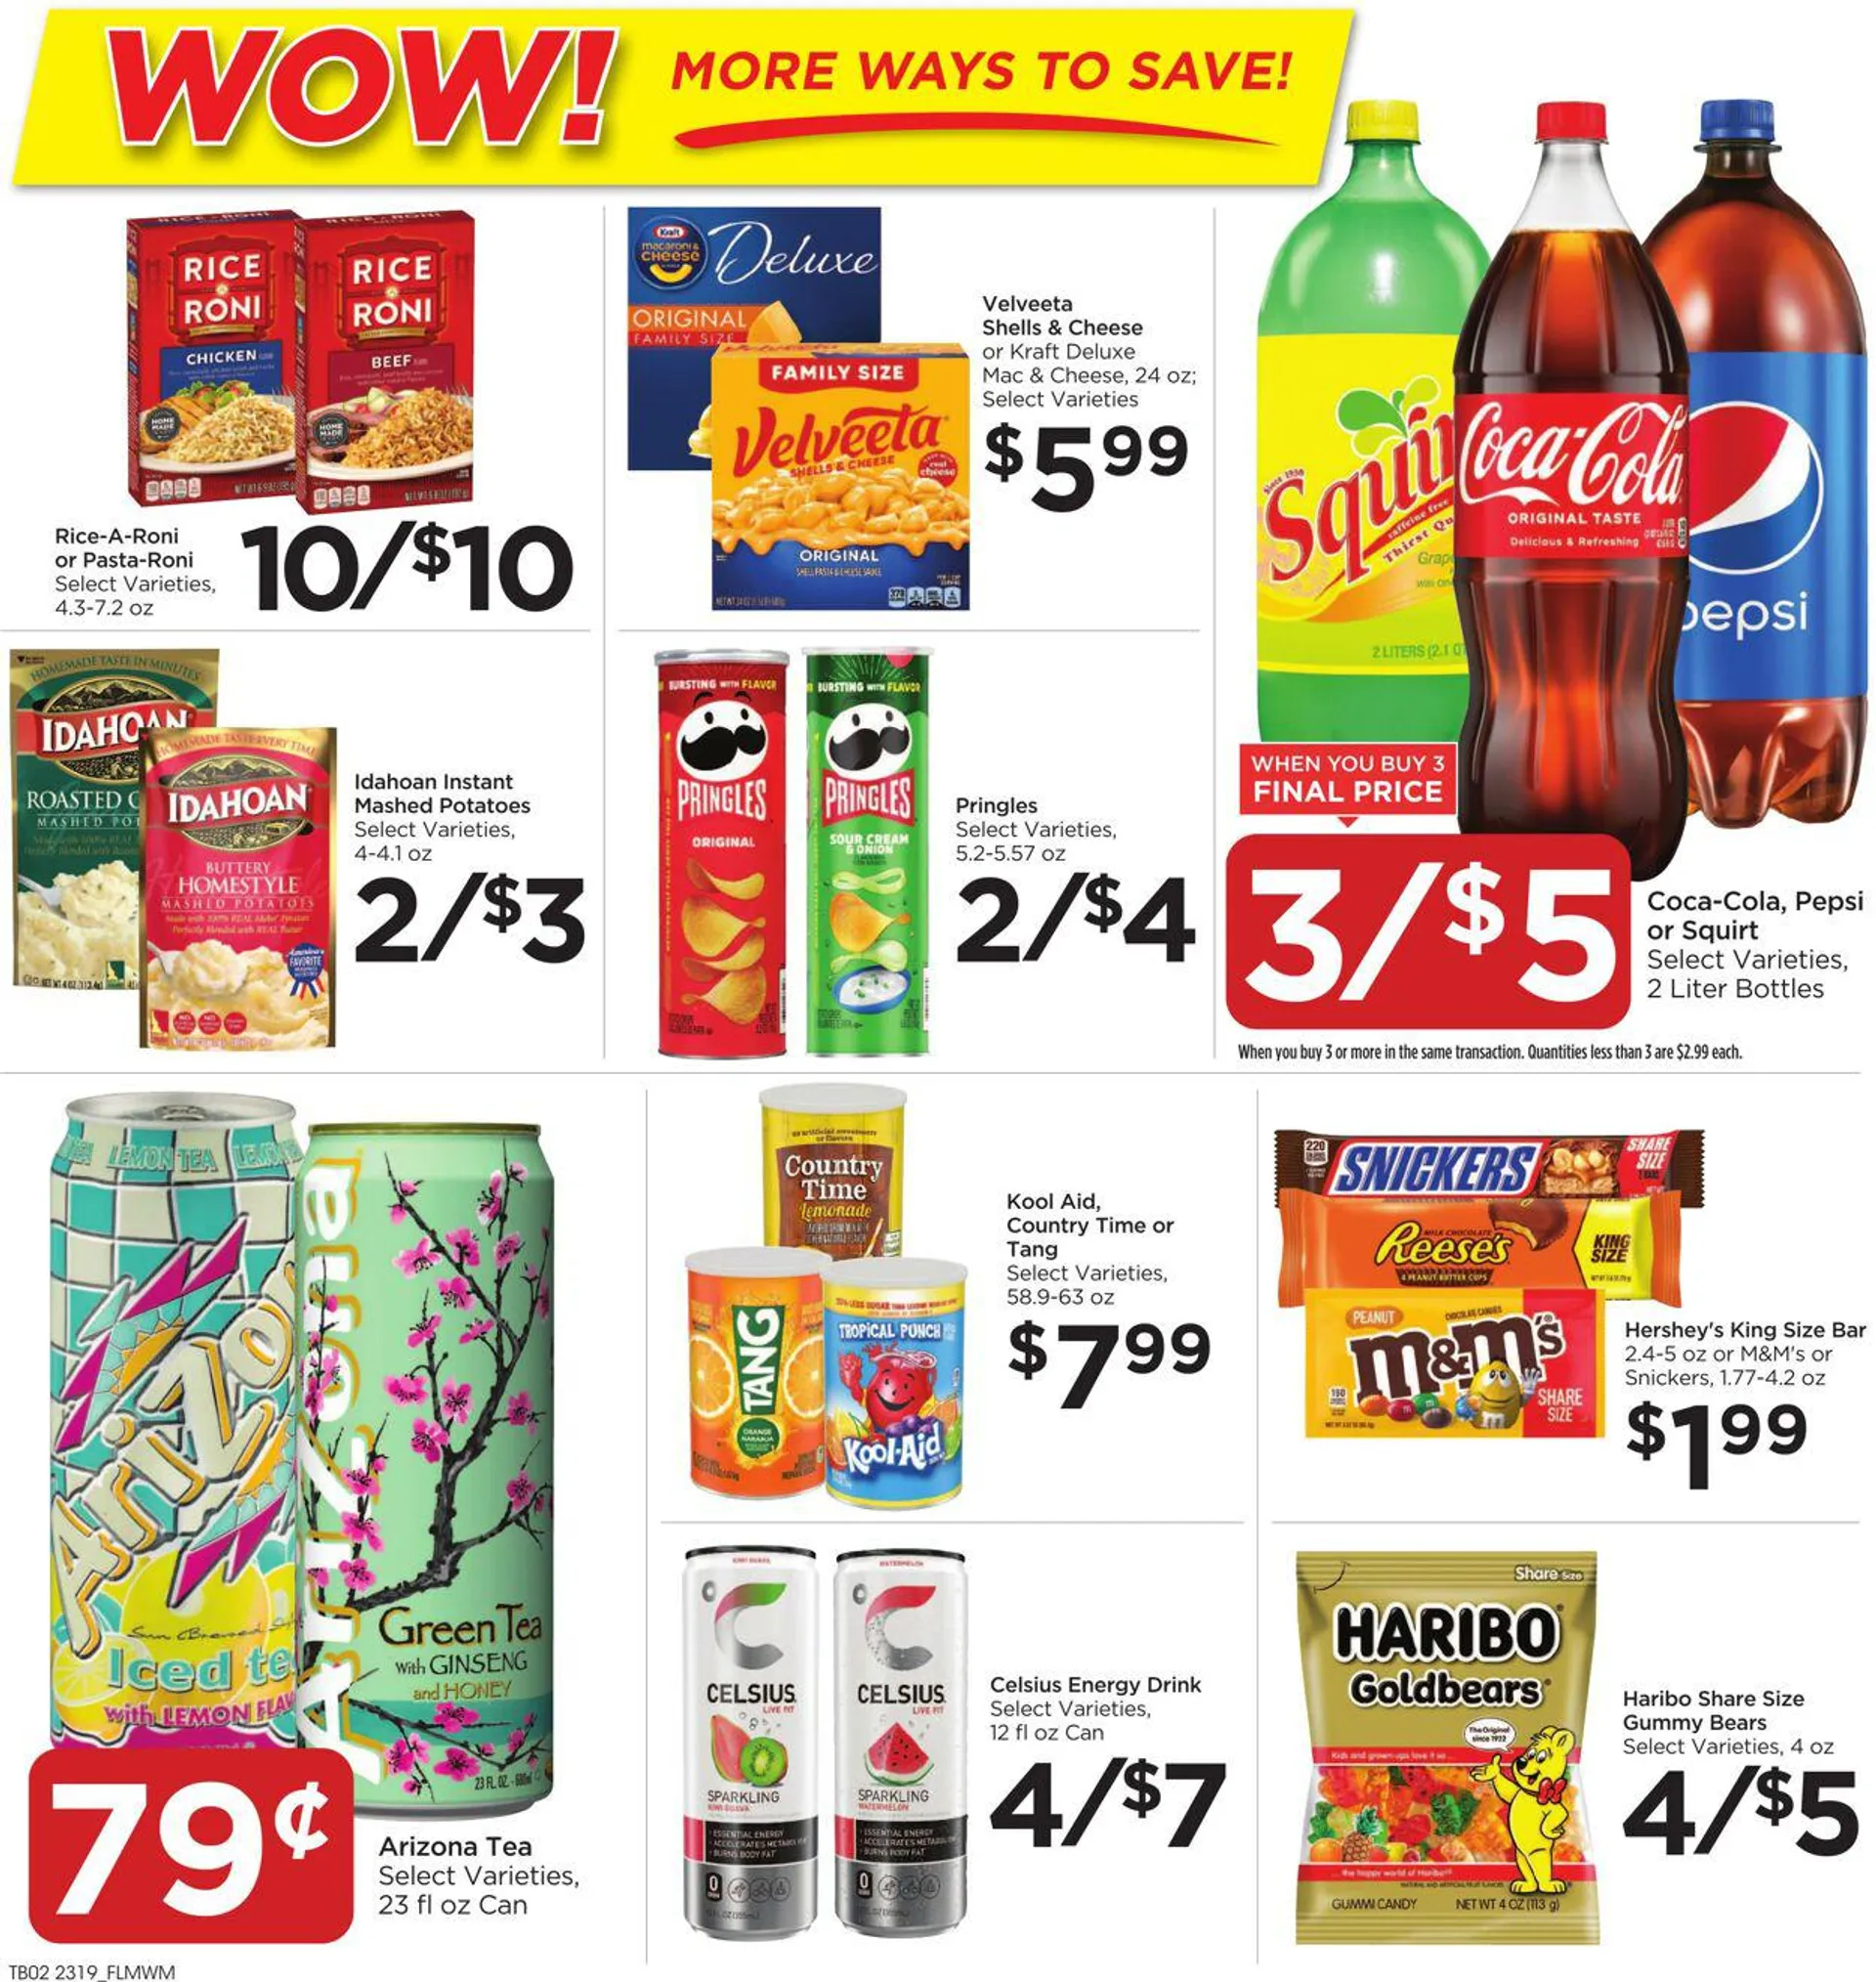 Food 4 Less Current weekly ad - 3